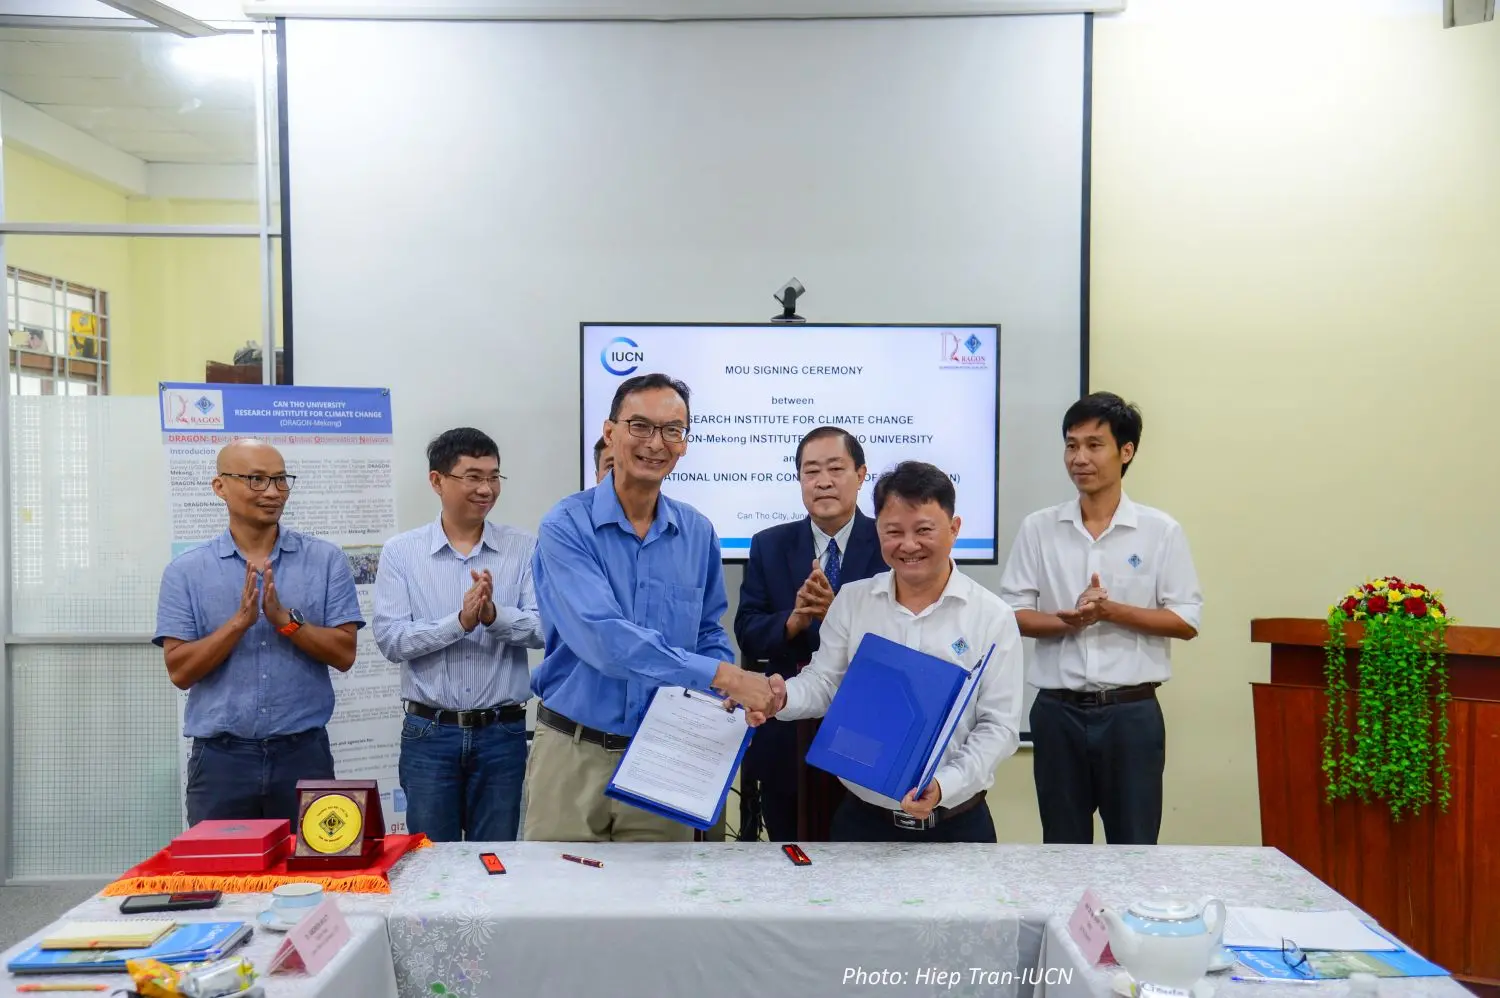 Dr. Andrew Wyatt (left), Deputy Head of IUCN Lower Mekong subregions and Prof. Van Pham Dang Tri, Director of DRAGON Institute signed MOU 